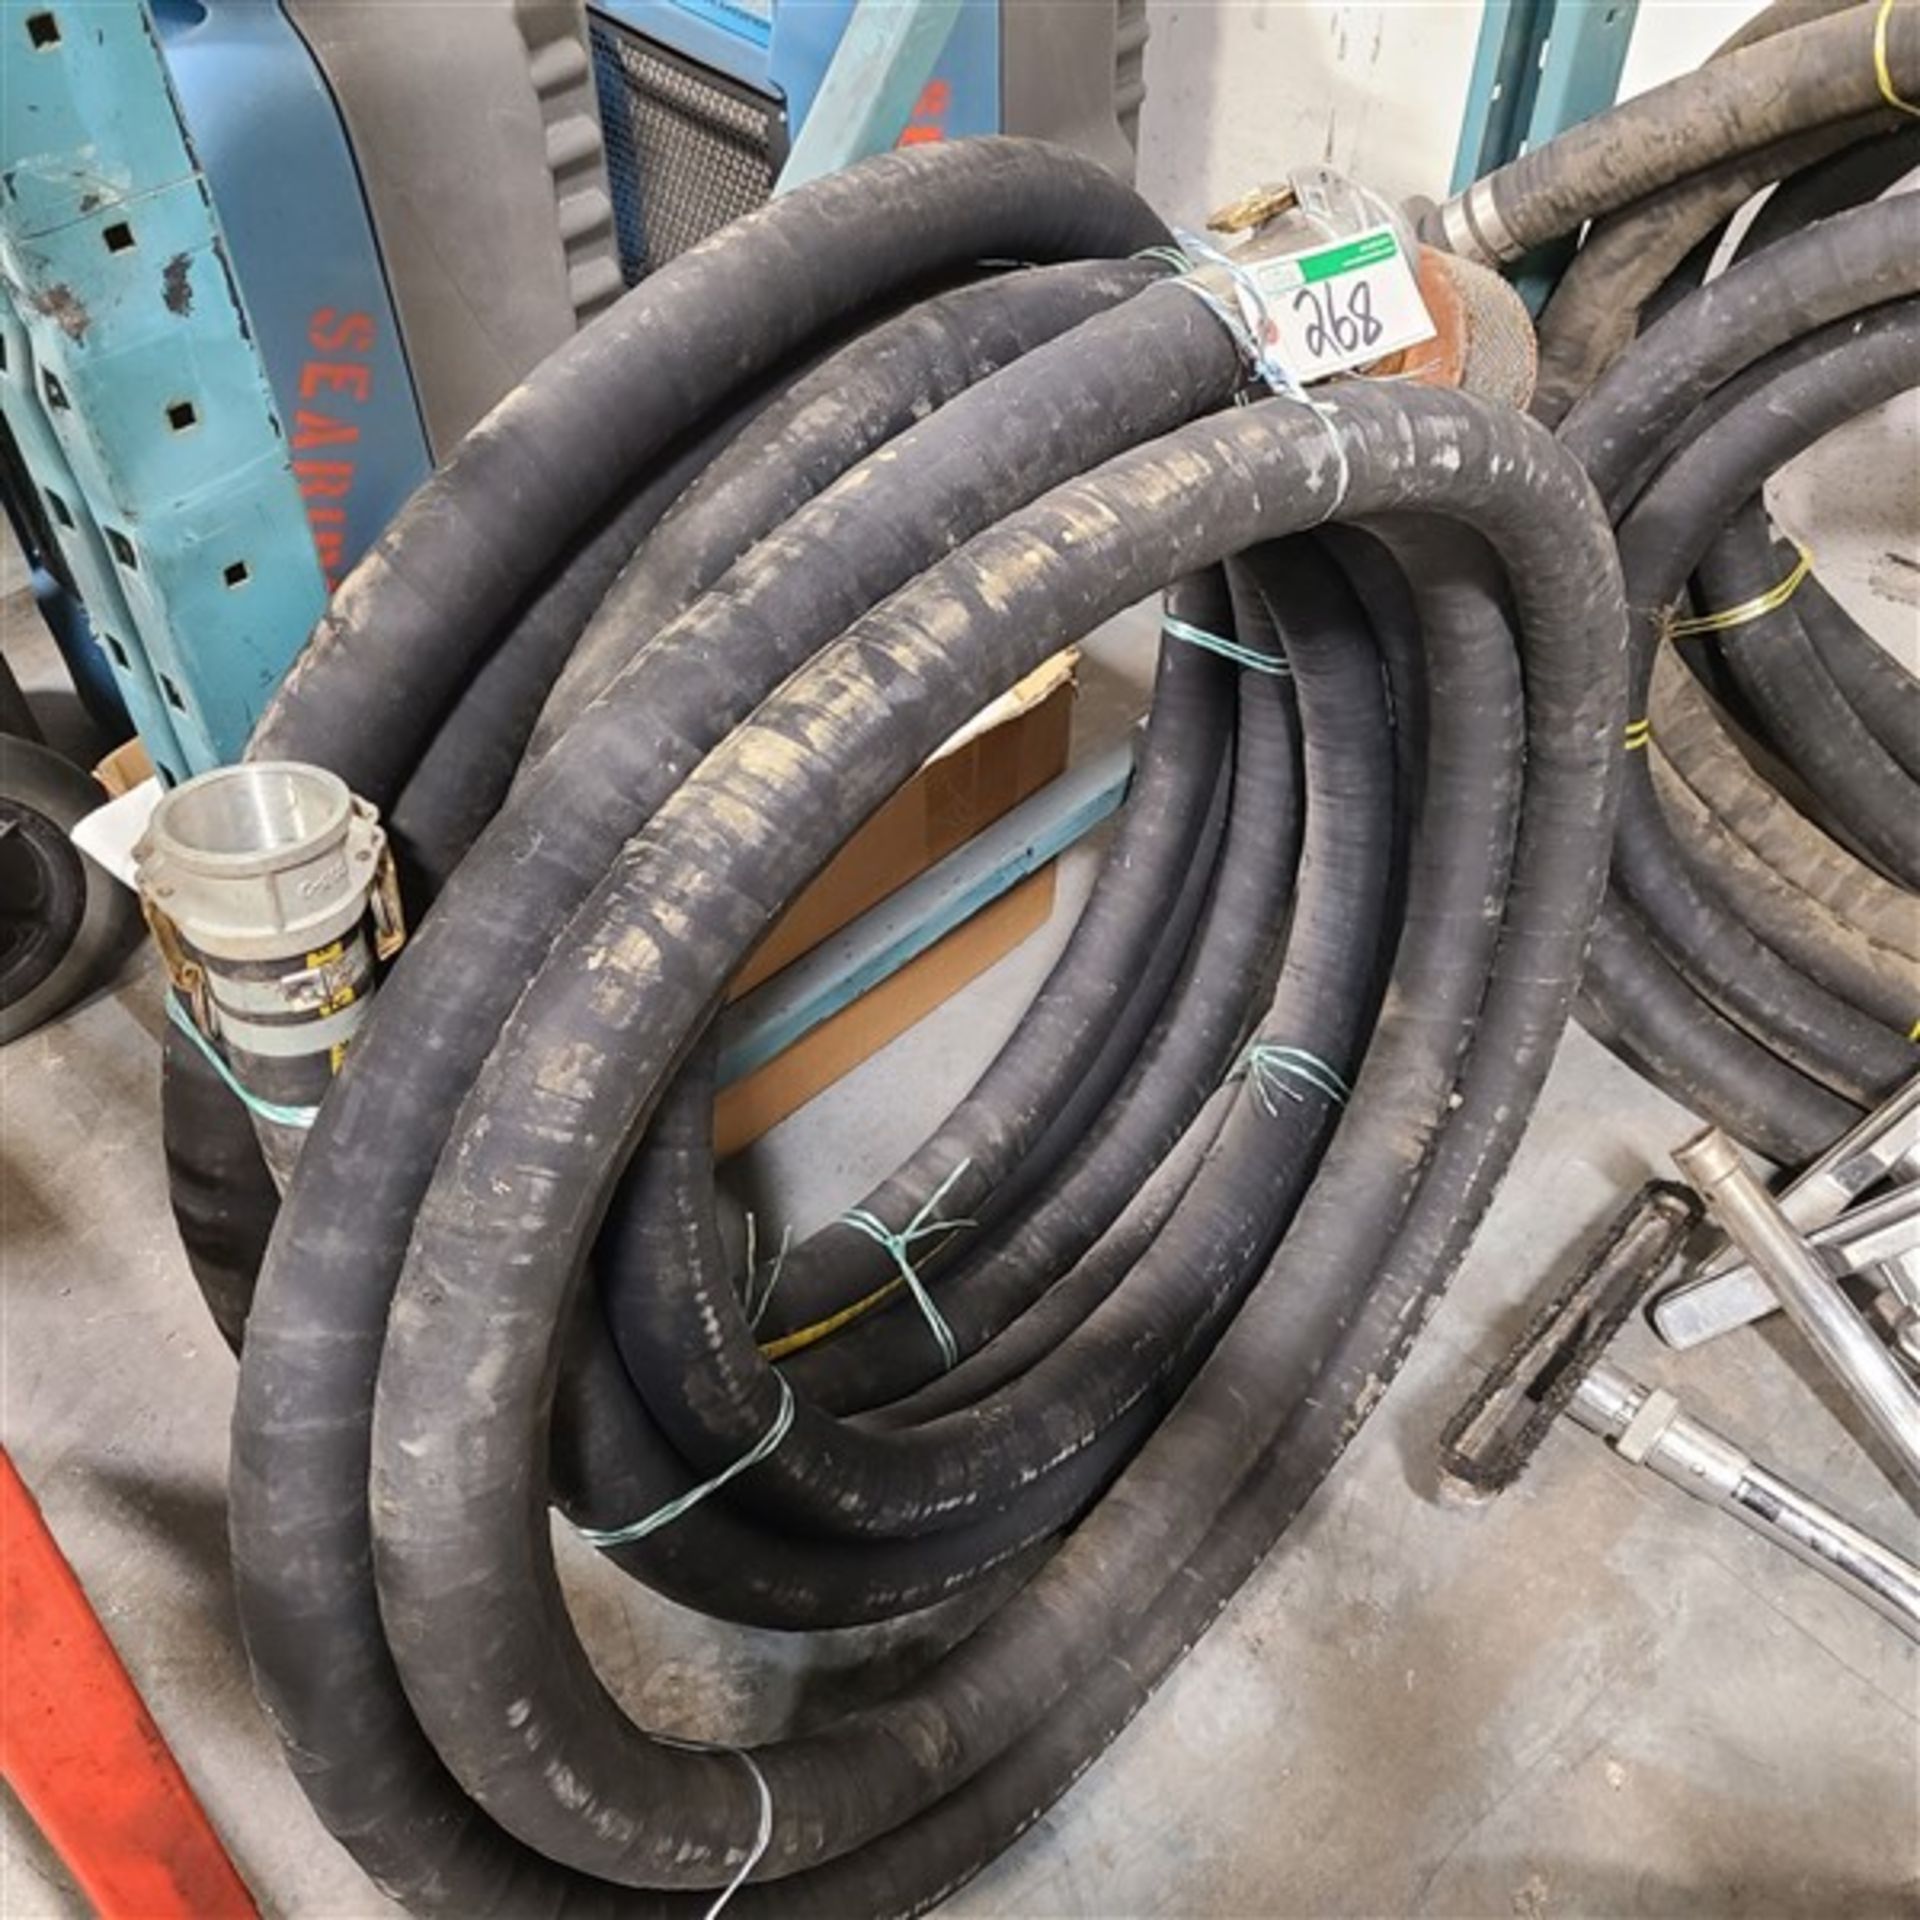 2 ROLLS OF 2 1/2 IN. PUMP HOSE W/FITTINGS, FILTERS